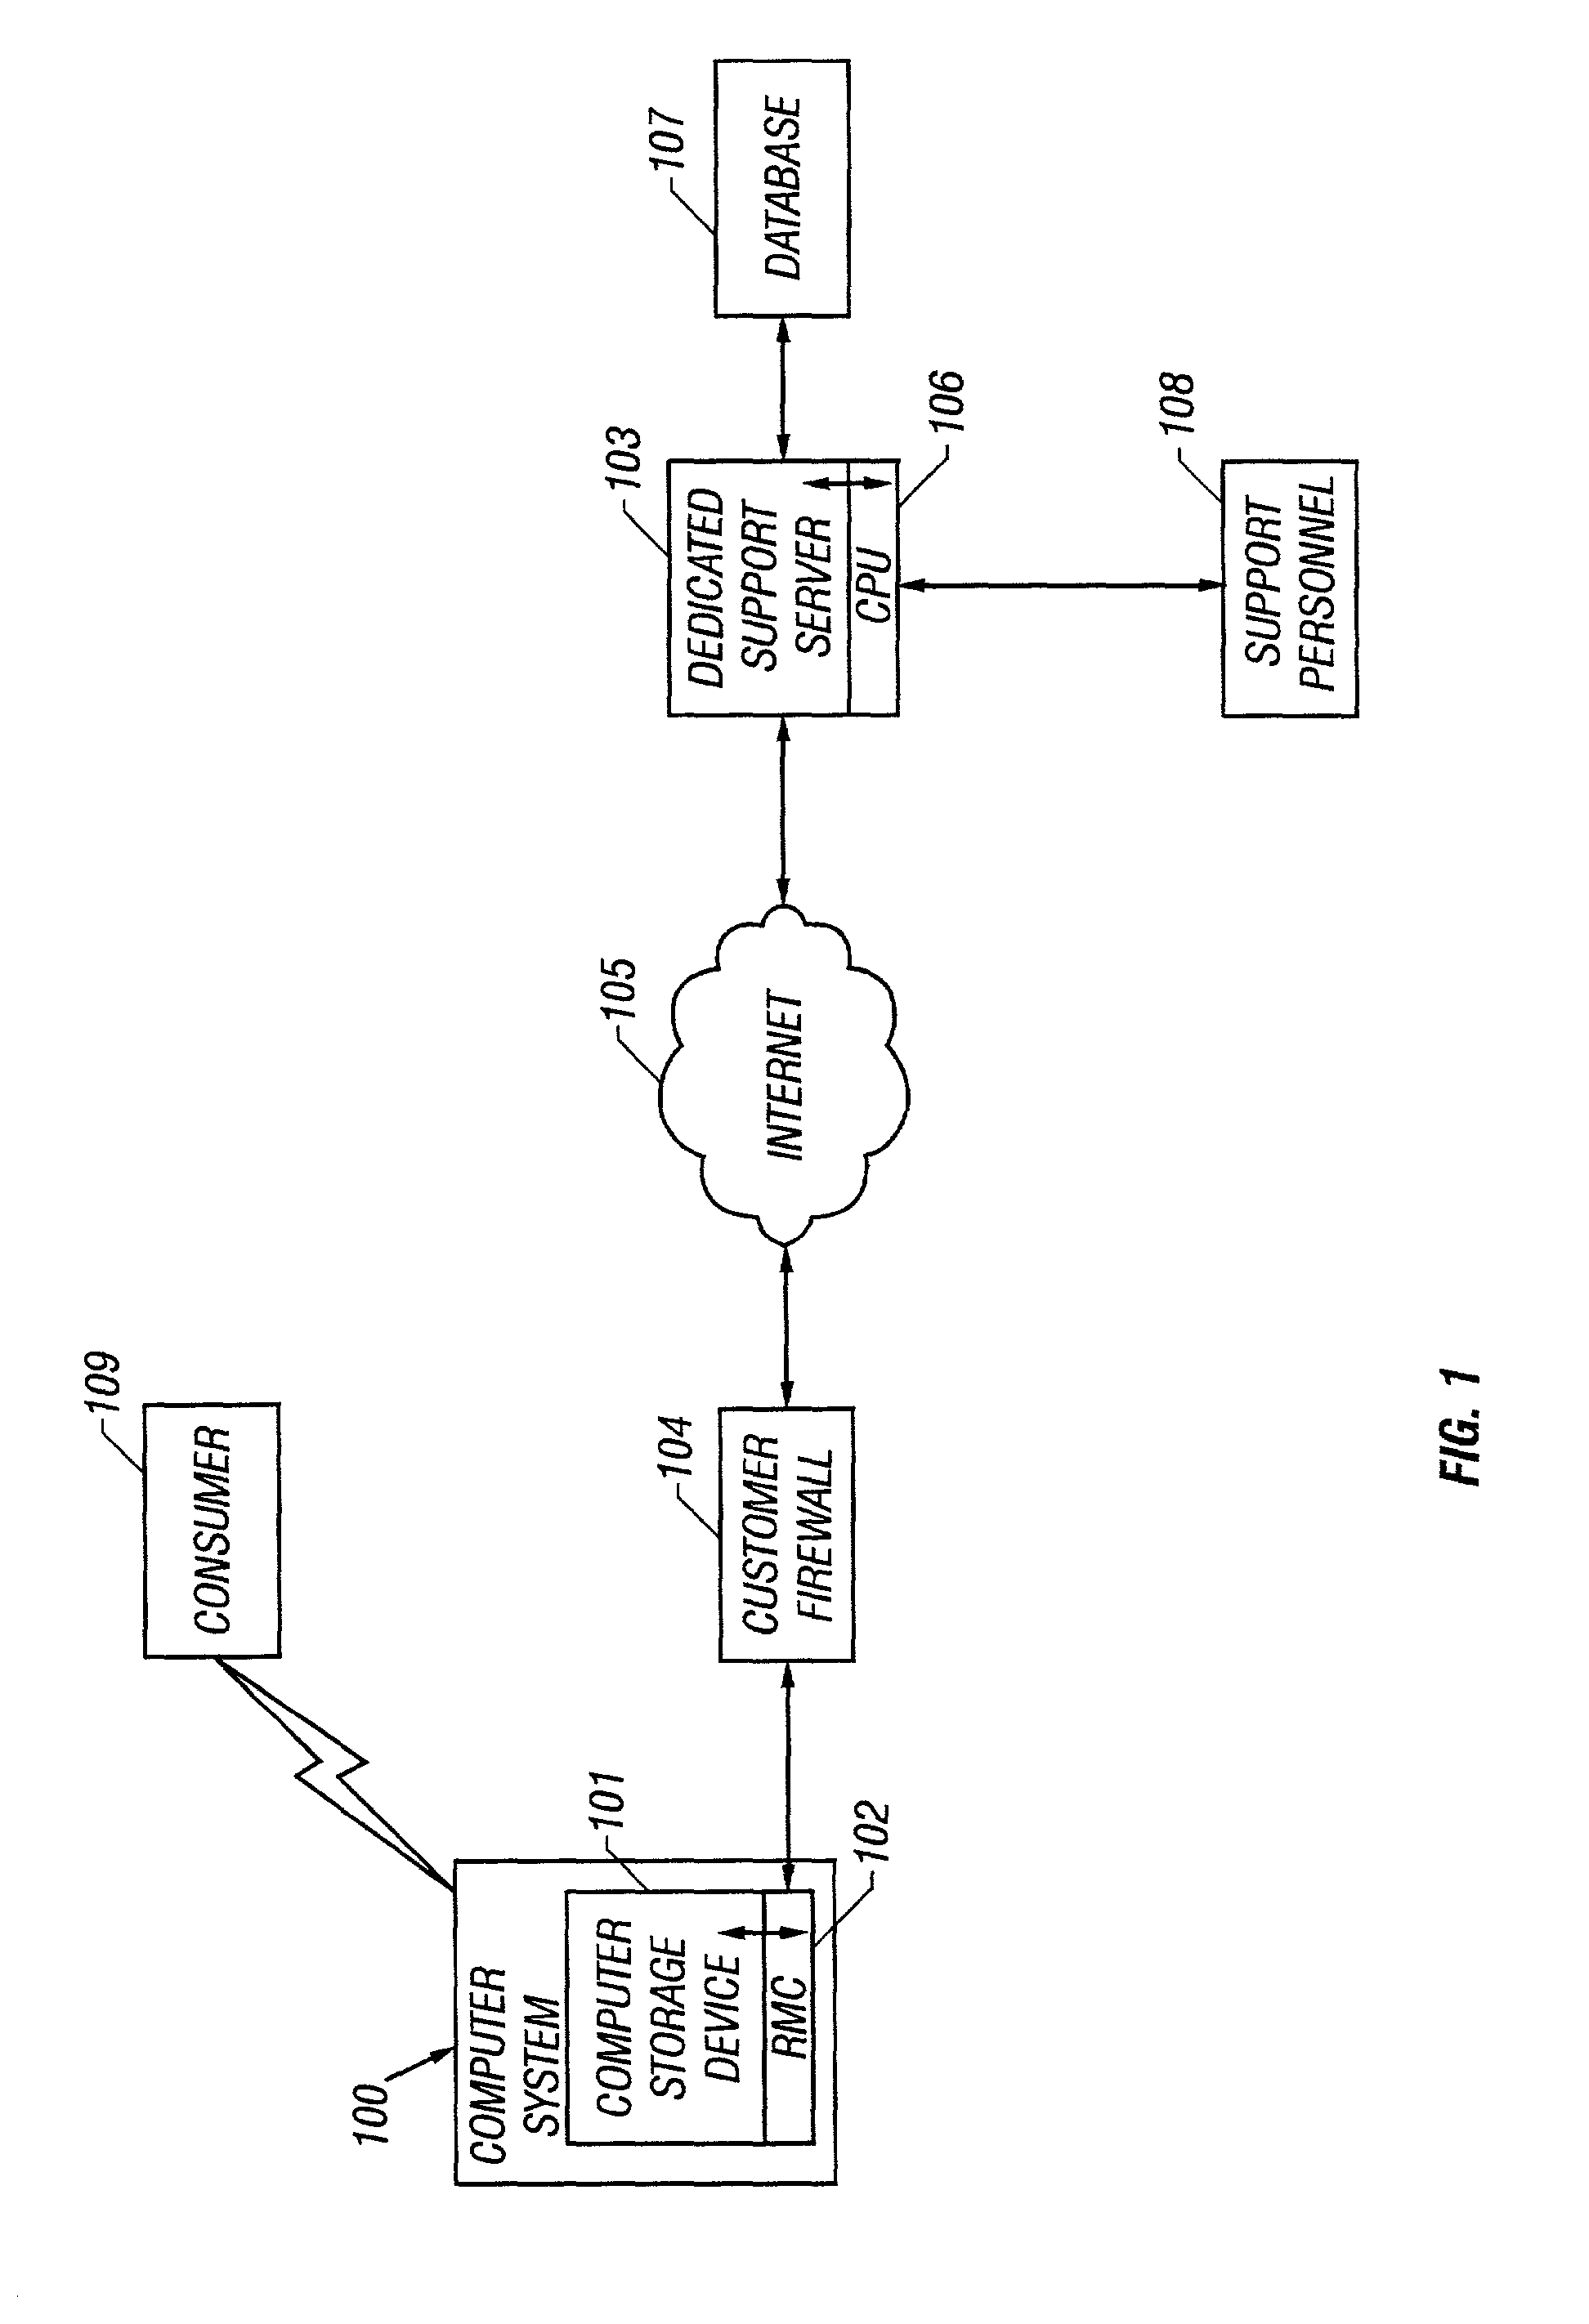 System and method of automatic parameter collection and problem solution generation for computer storage devices